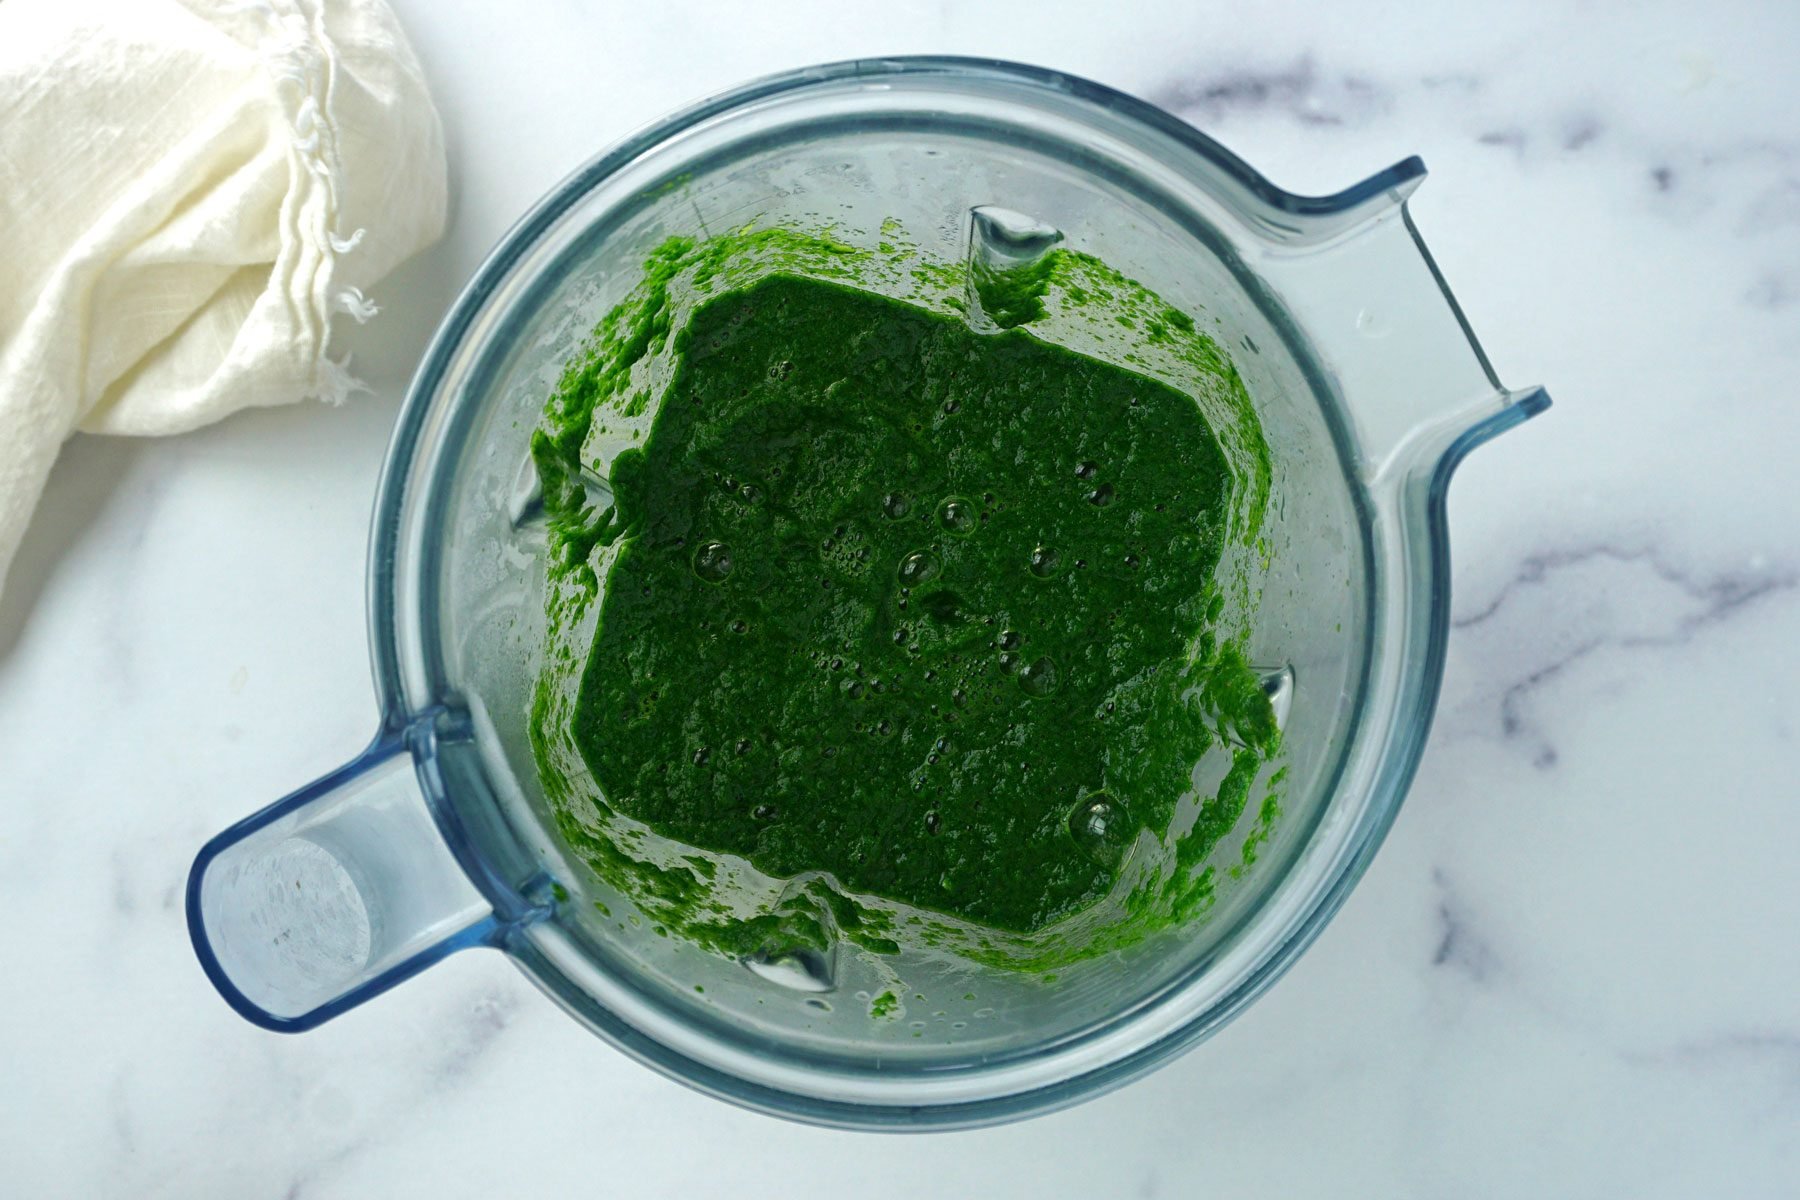 Spinach and other ingredients blended in a mixture